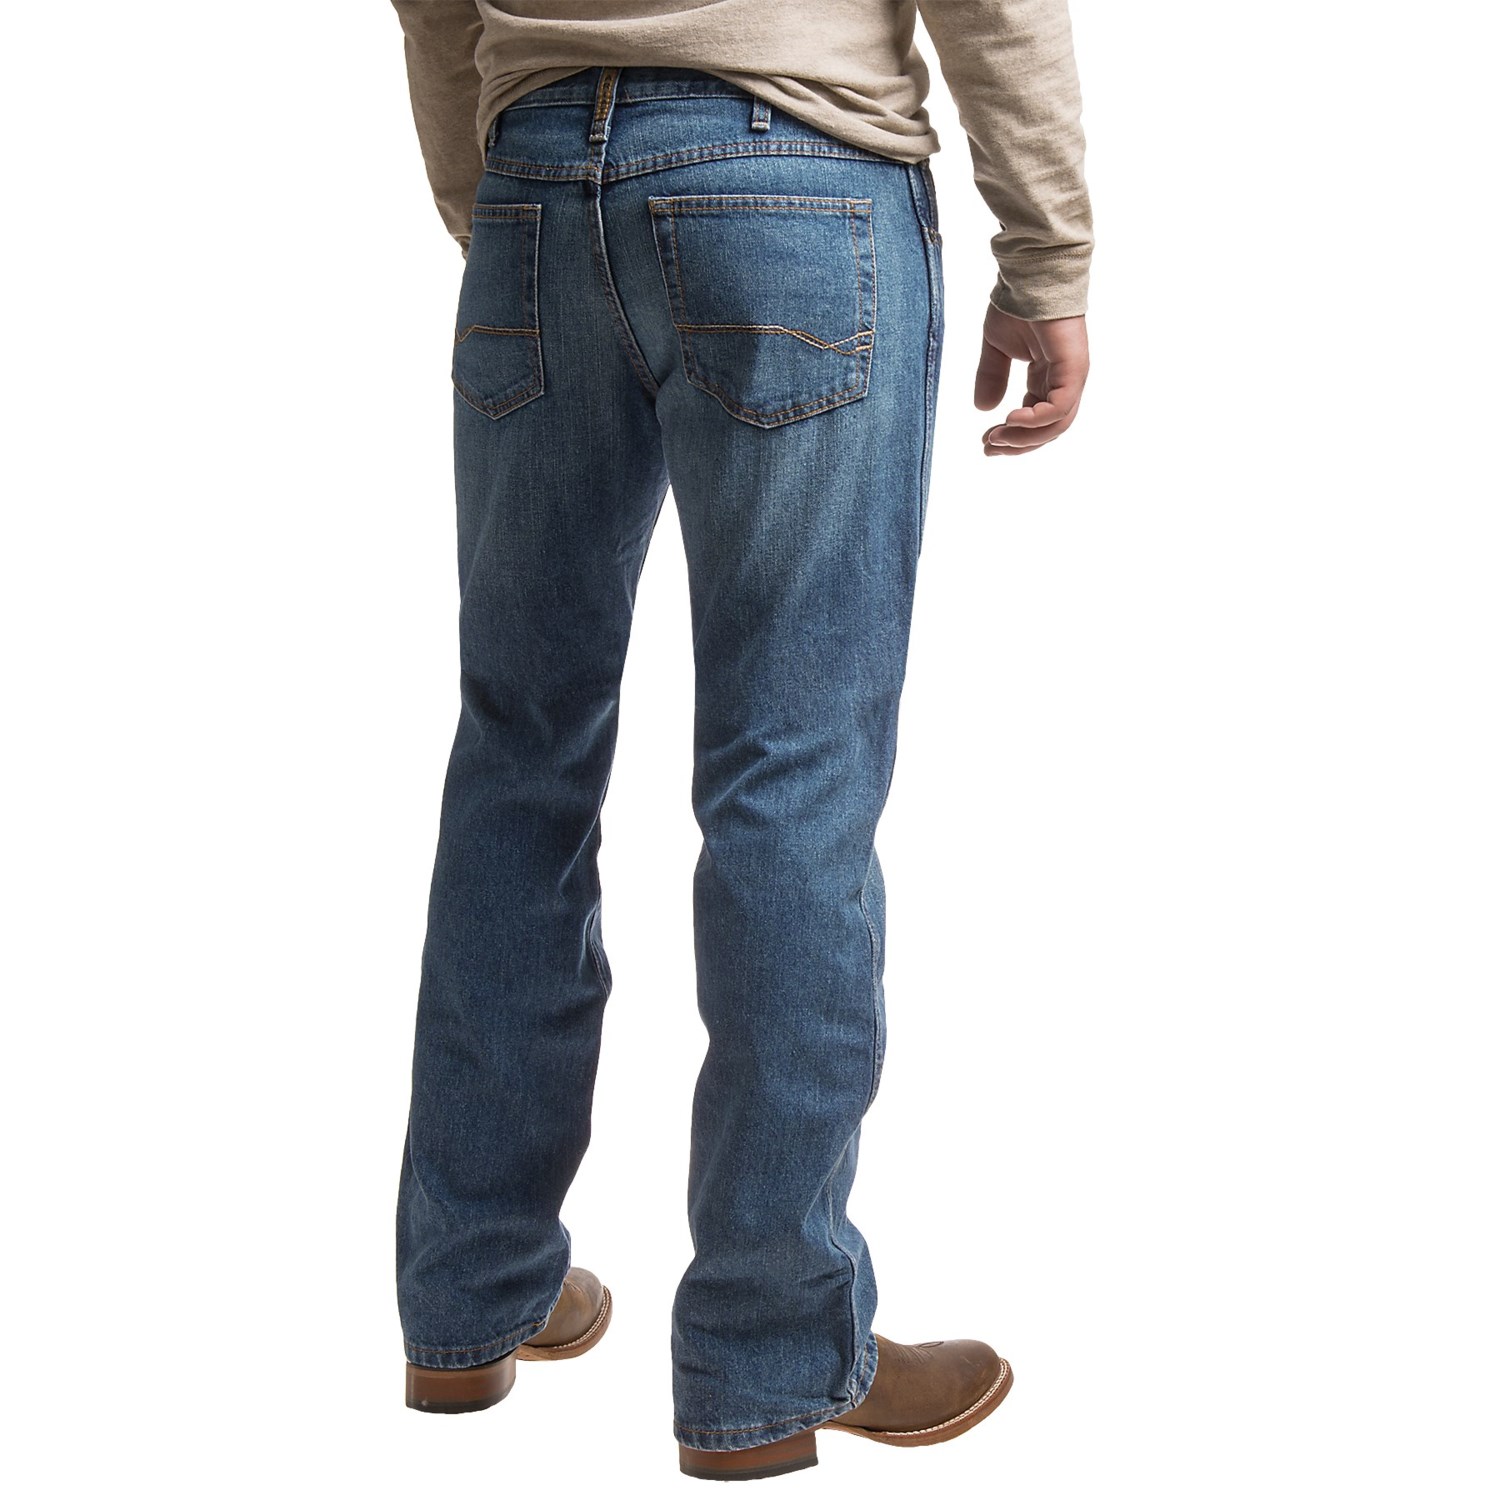 Ariat Heritage Jeans (For Men) - Save 66%